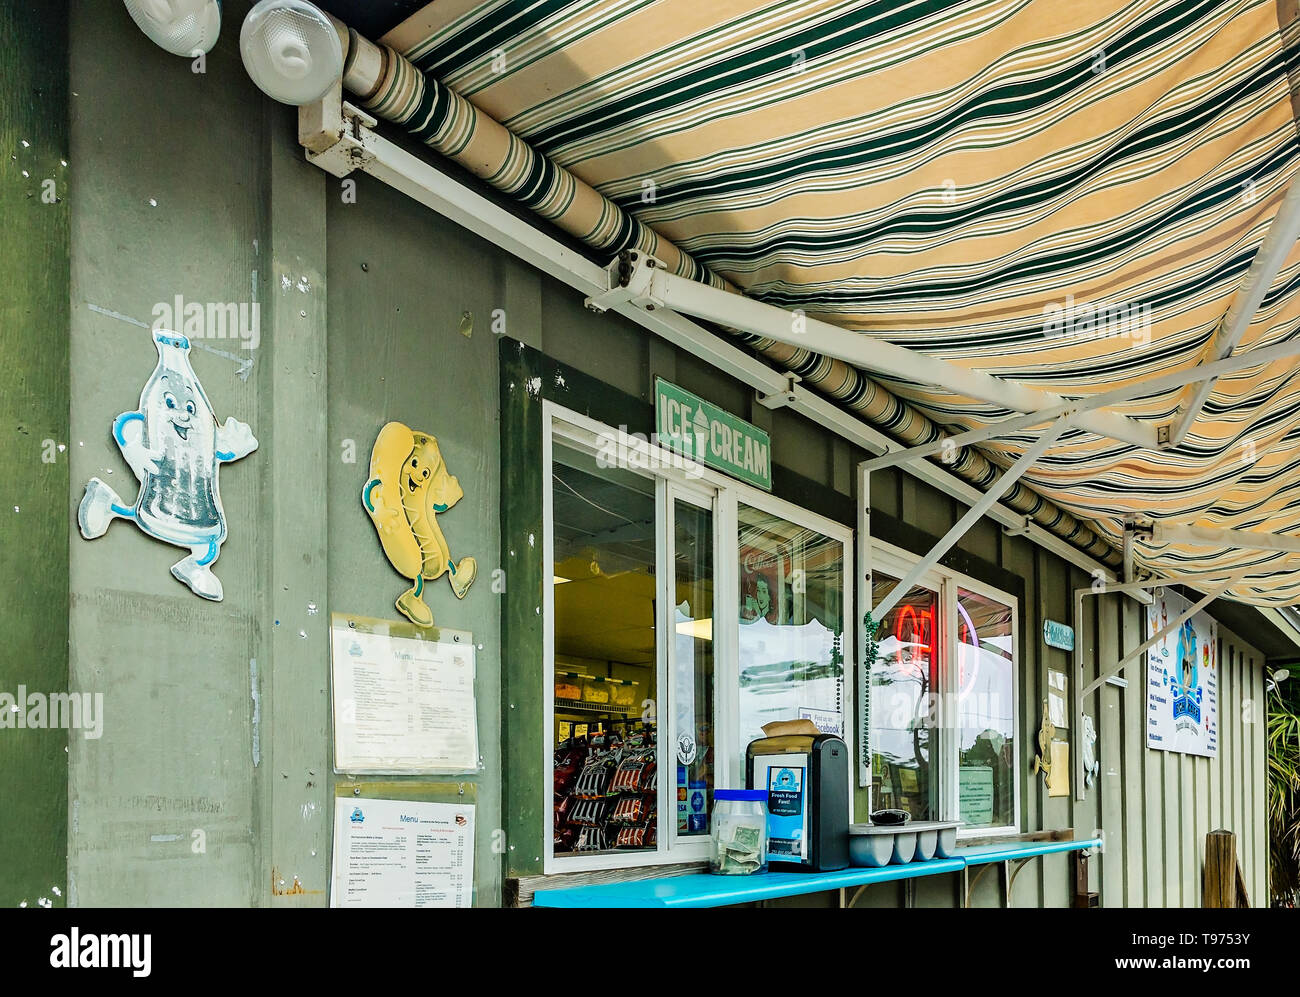 A striped awning and retro signs decorate the exterior of Billy Goat Concessions, also called BGH Cafe, Feb. 3, 2018, in Dauphin Island, Alabama. Stock Photo